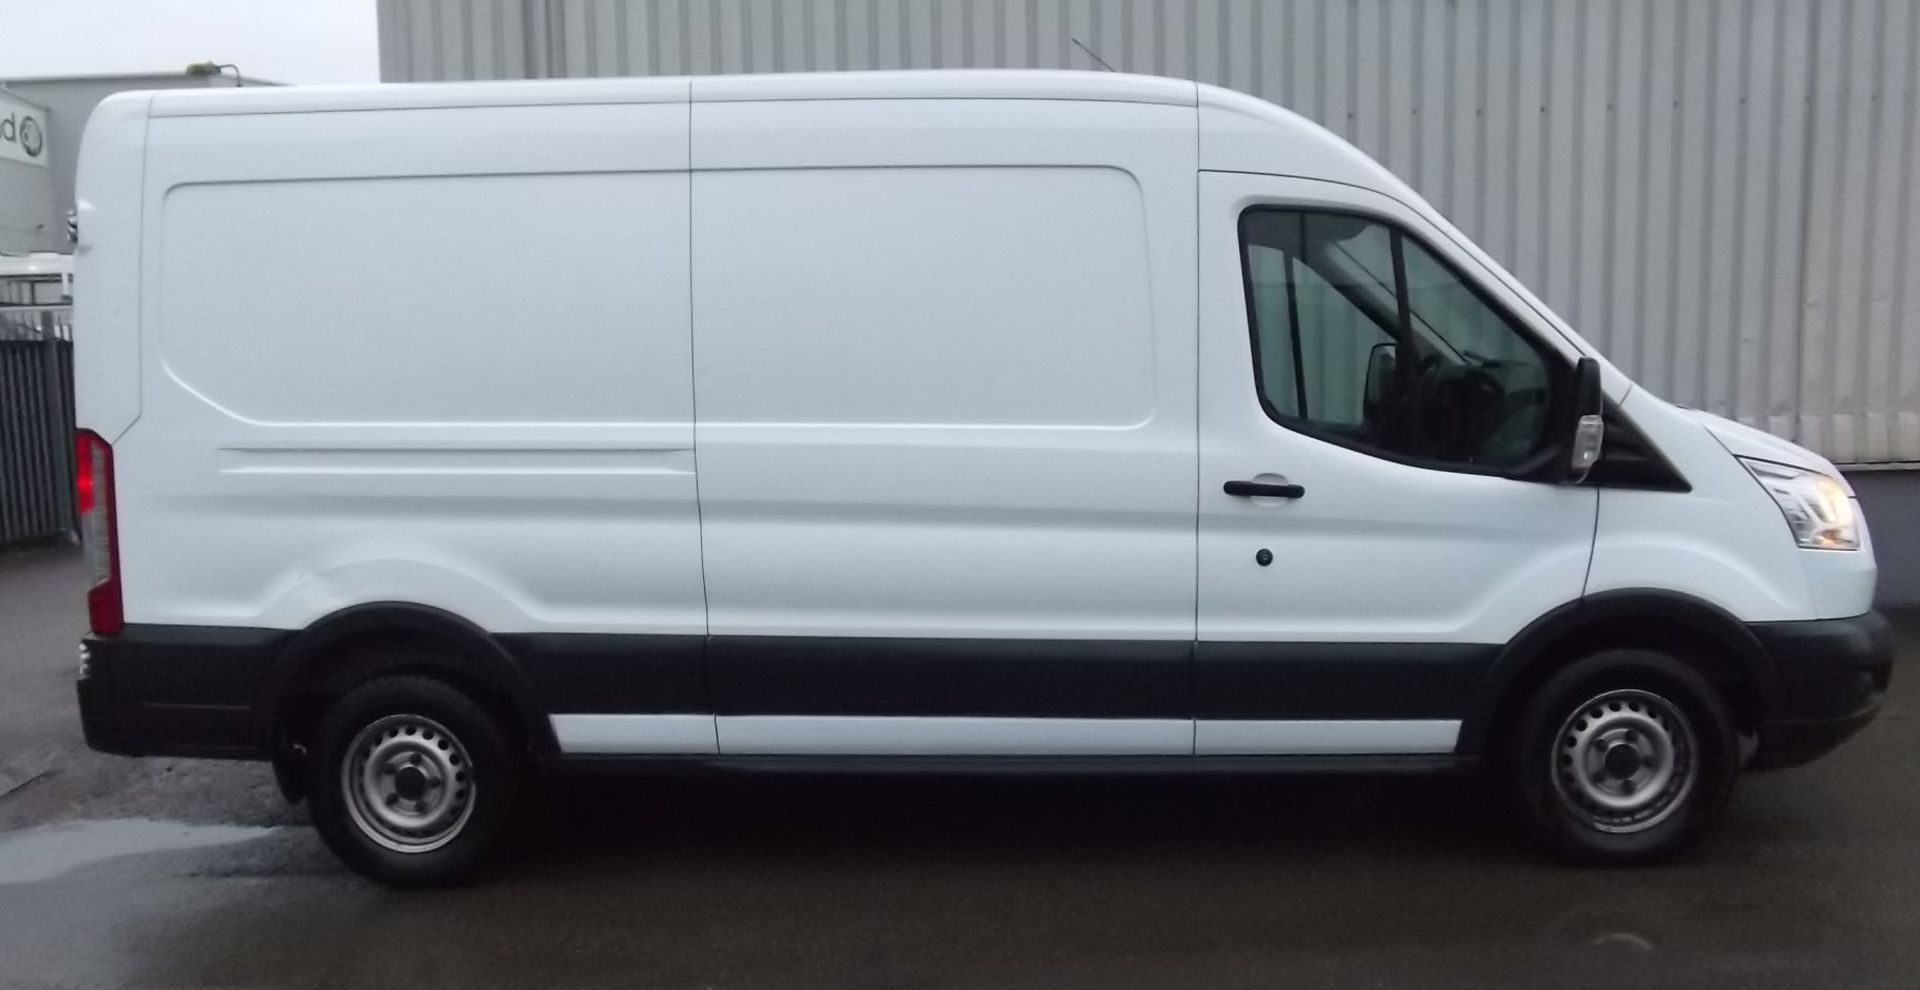 2016 Ford Transit 350 2.2 TDCi 125ps H2 Panel Van - CL505 - Location: Corby, Northamptonshire - Image 5 of 15